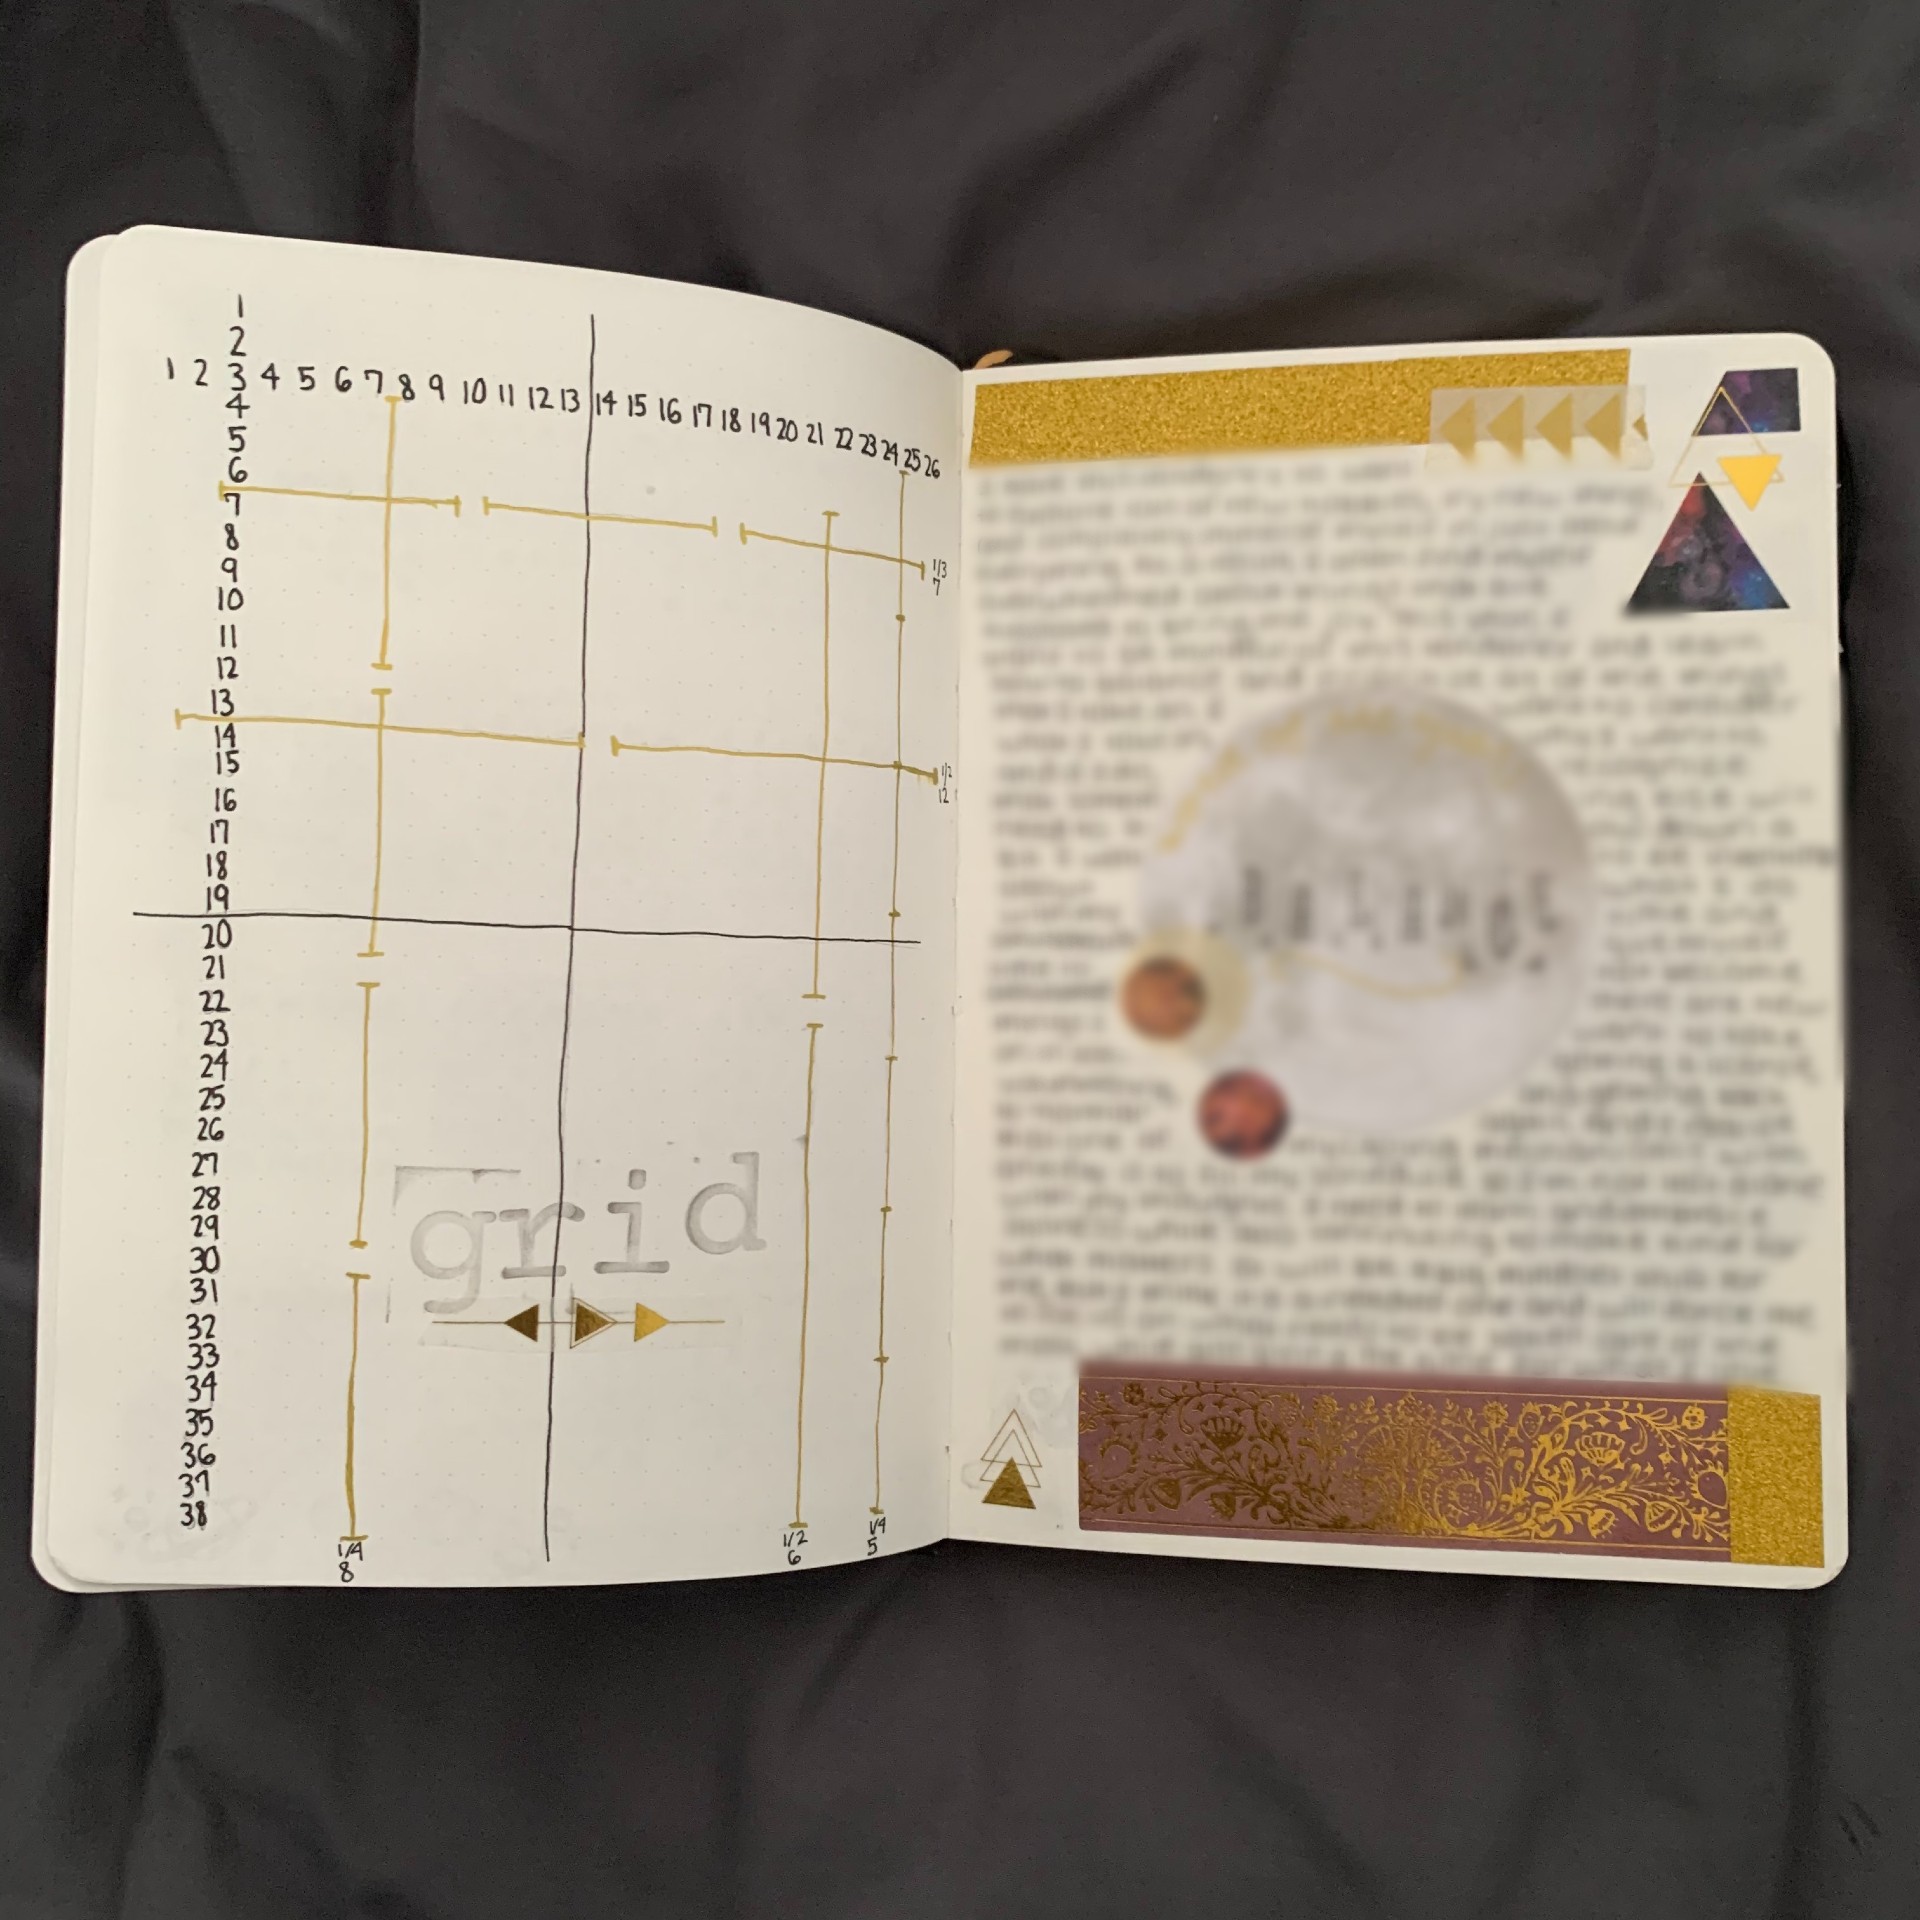 2021 Bullet Journal - Grid Spacer and Word of the Year